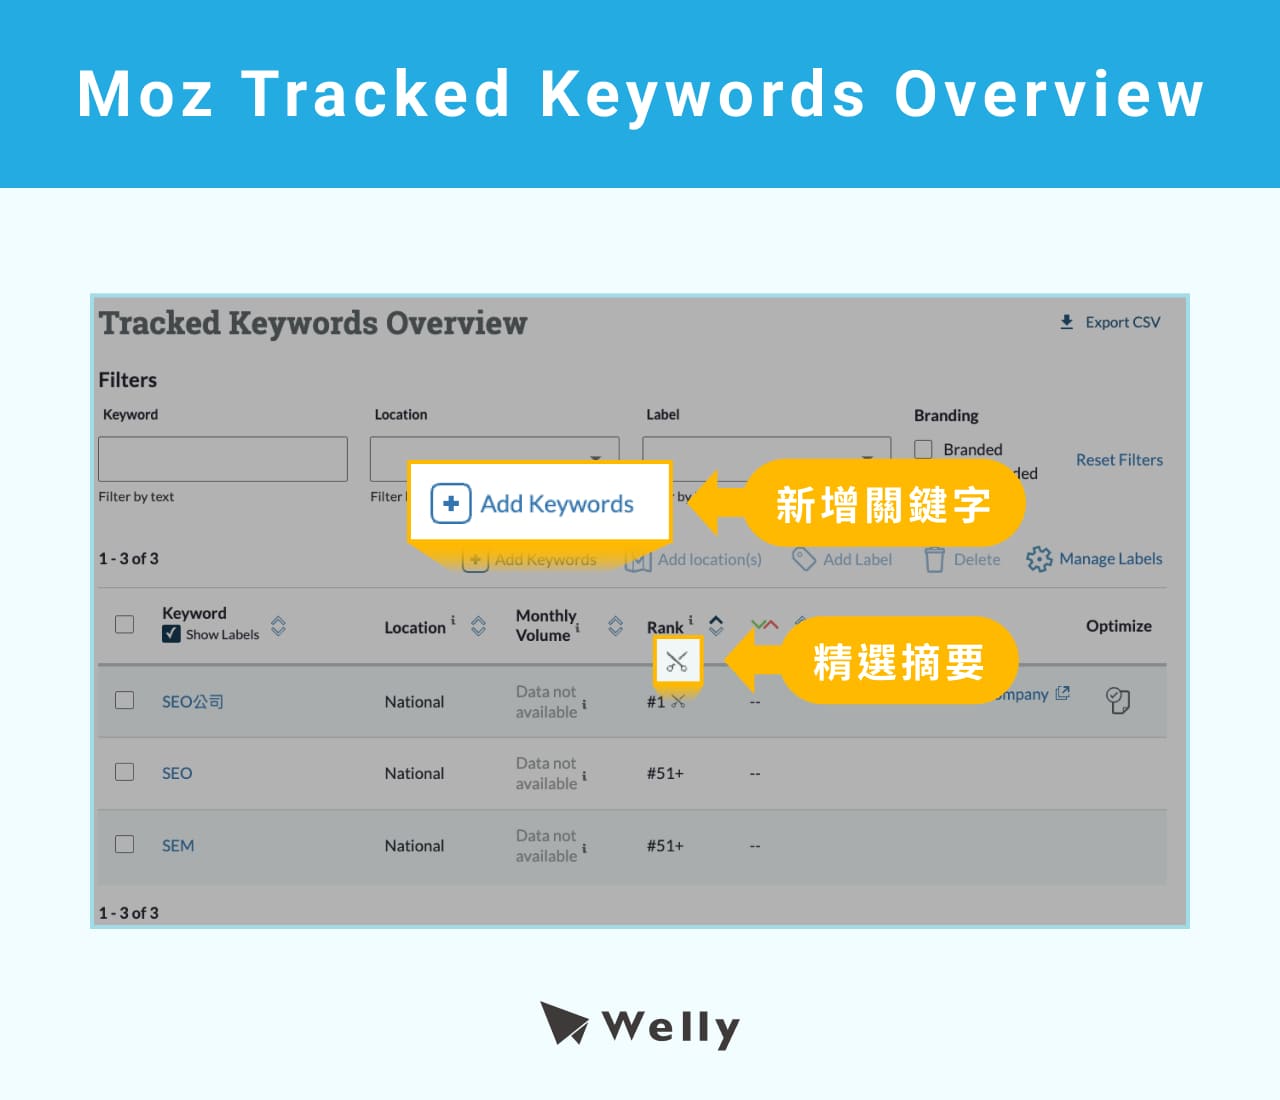 Moz Tracked Keywords Overview